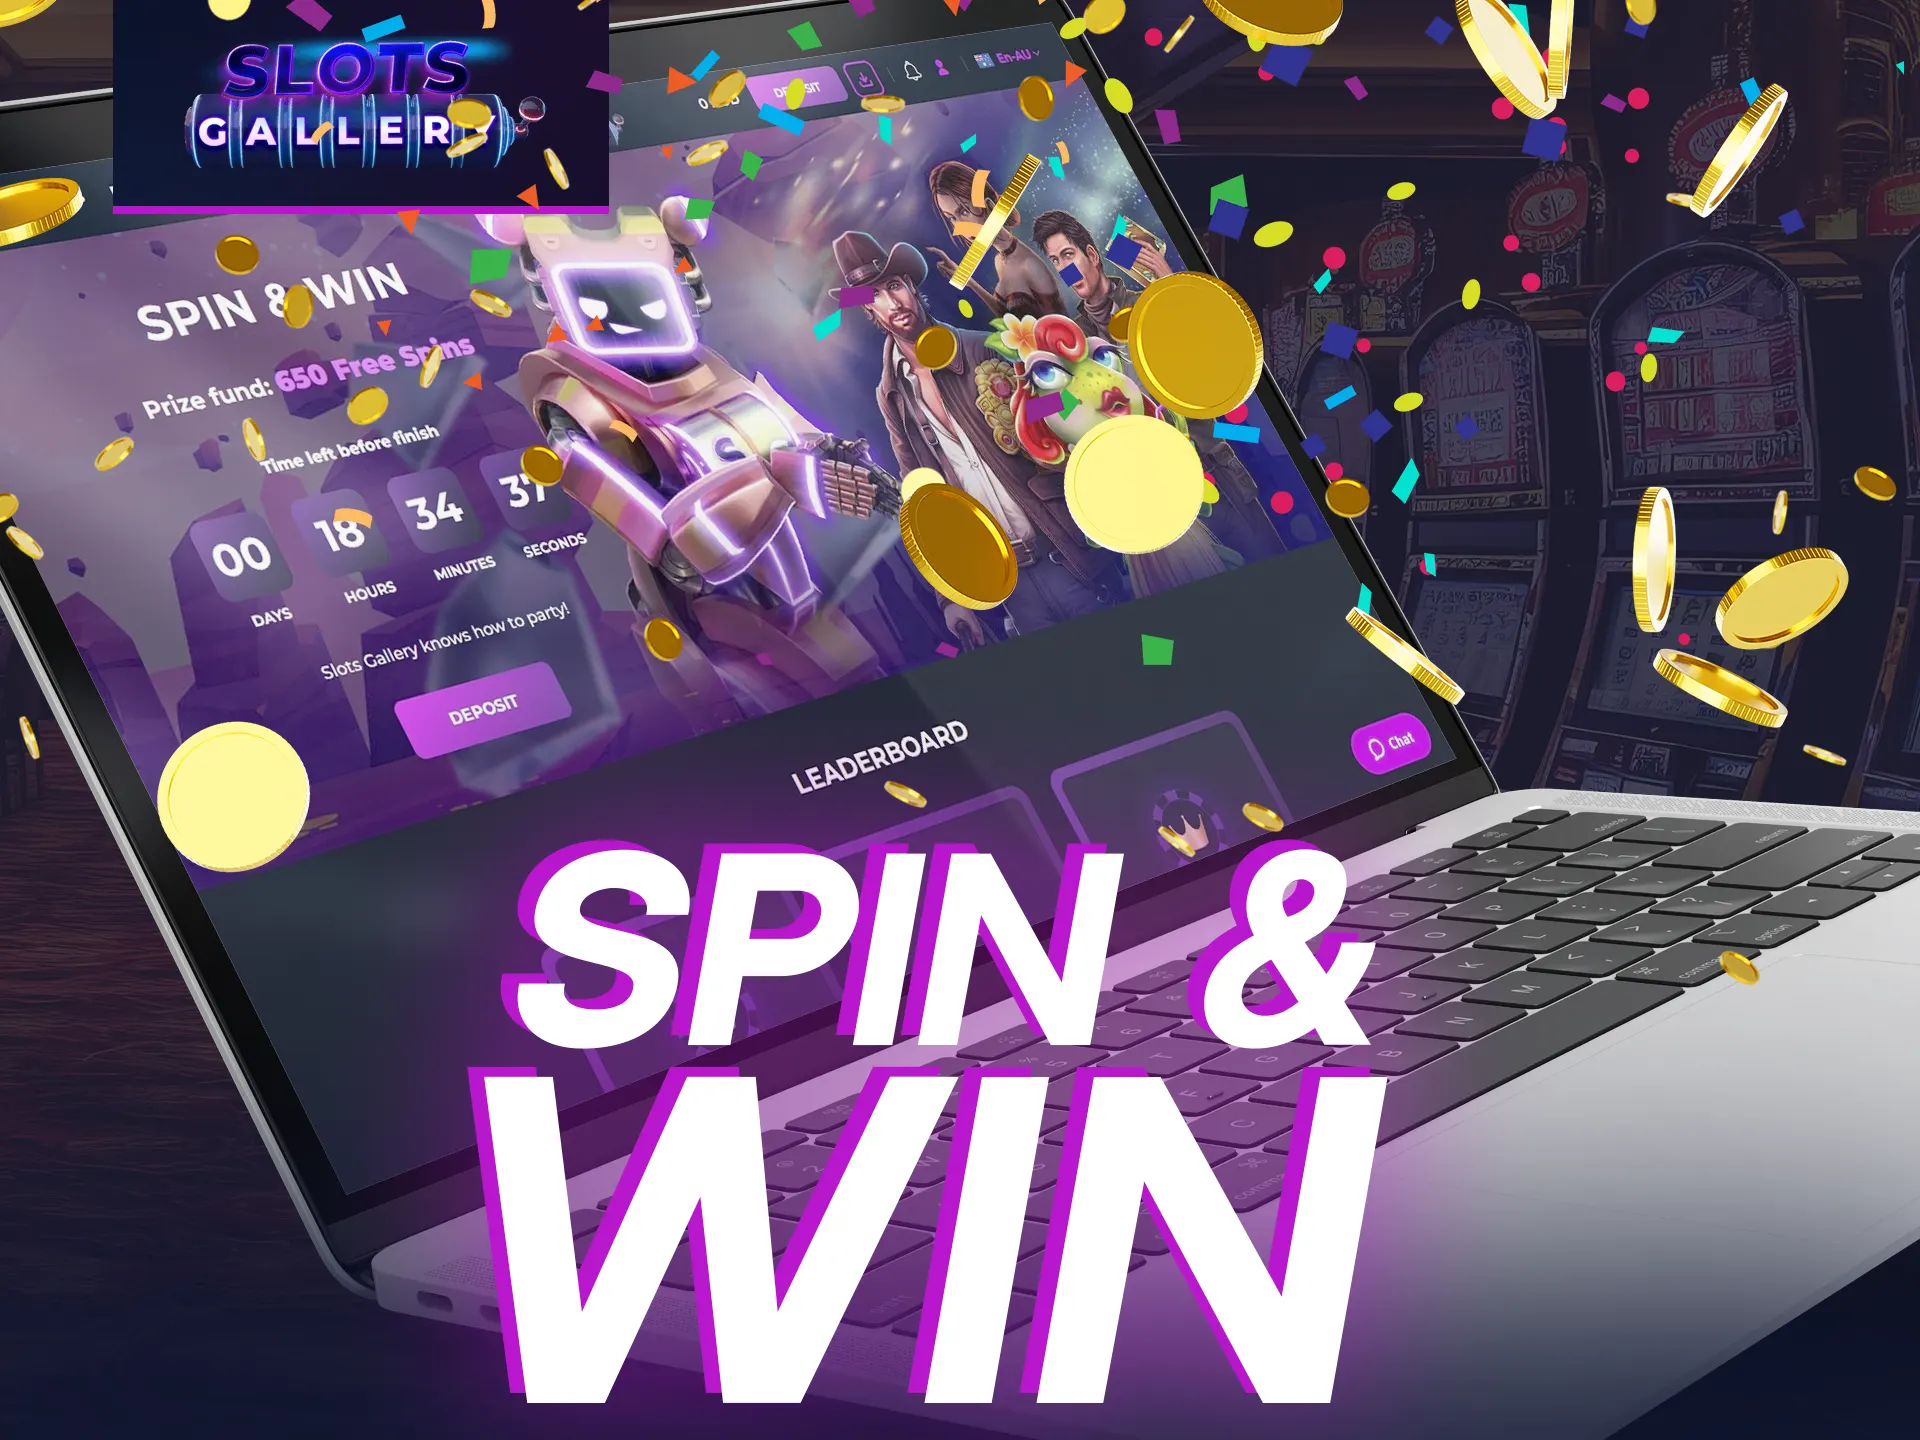 Participate in Spin and Win tournament for 650 free spins.